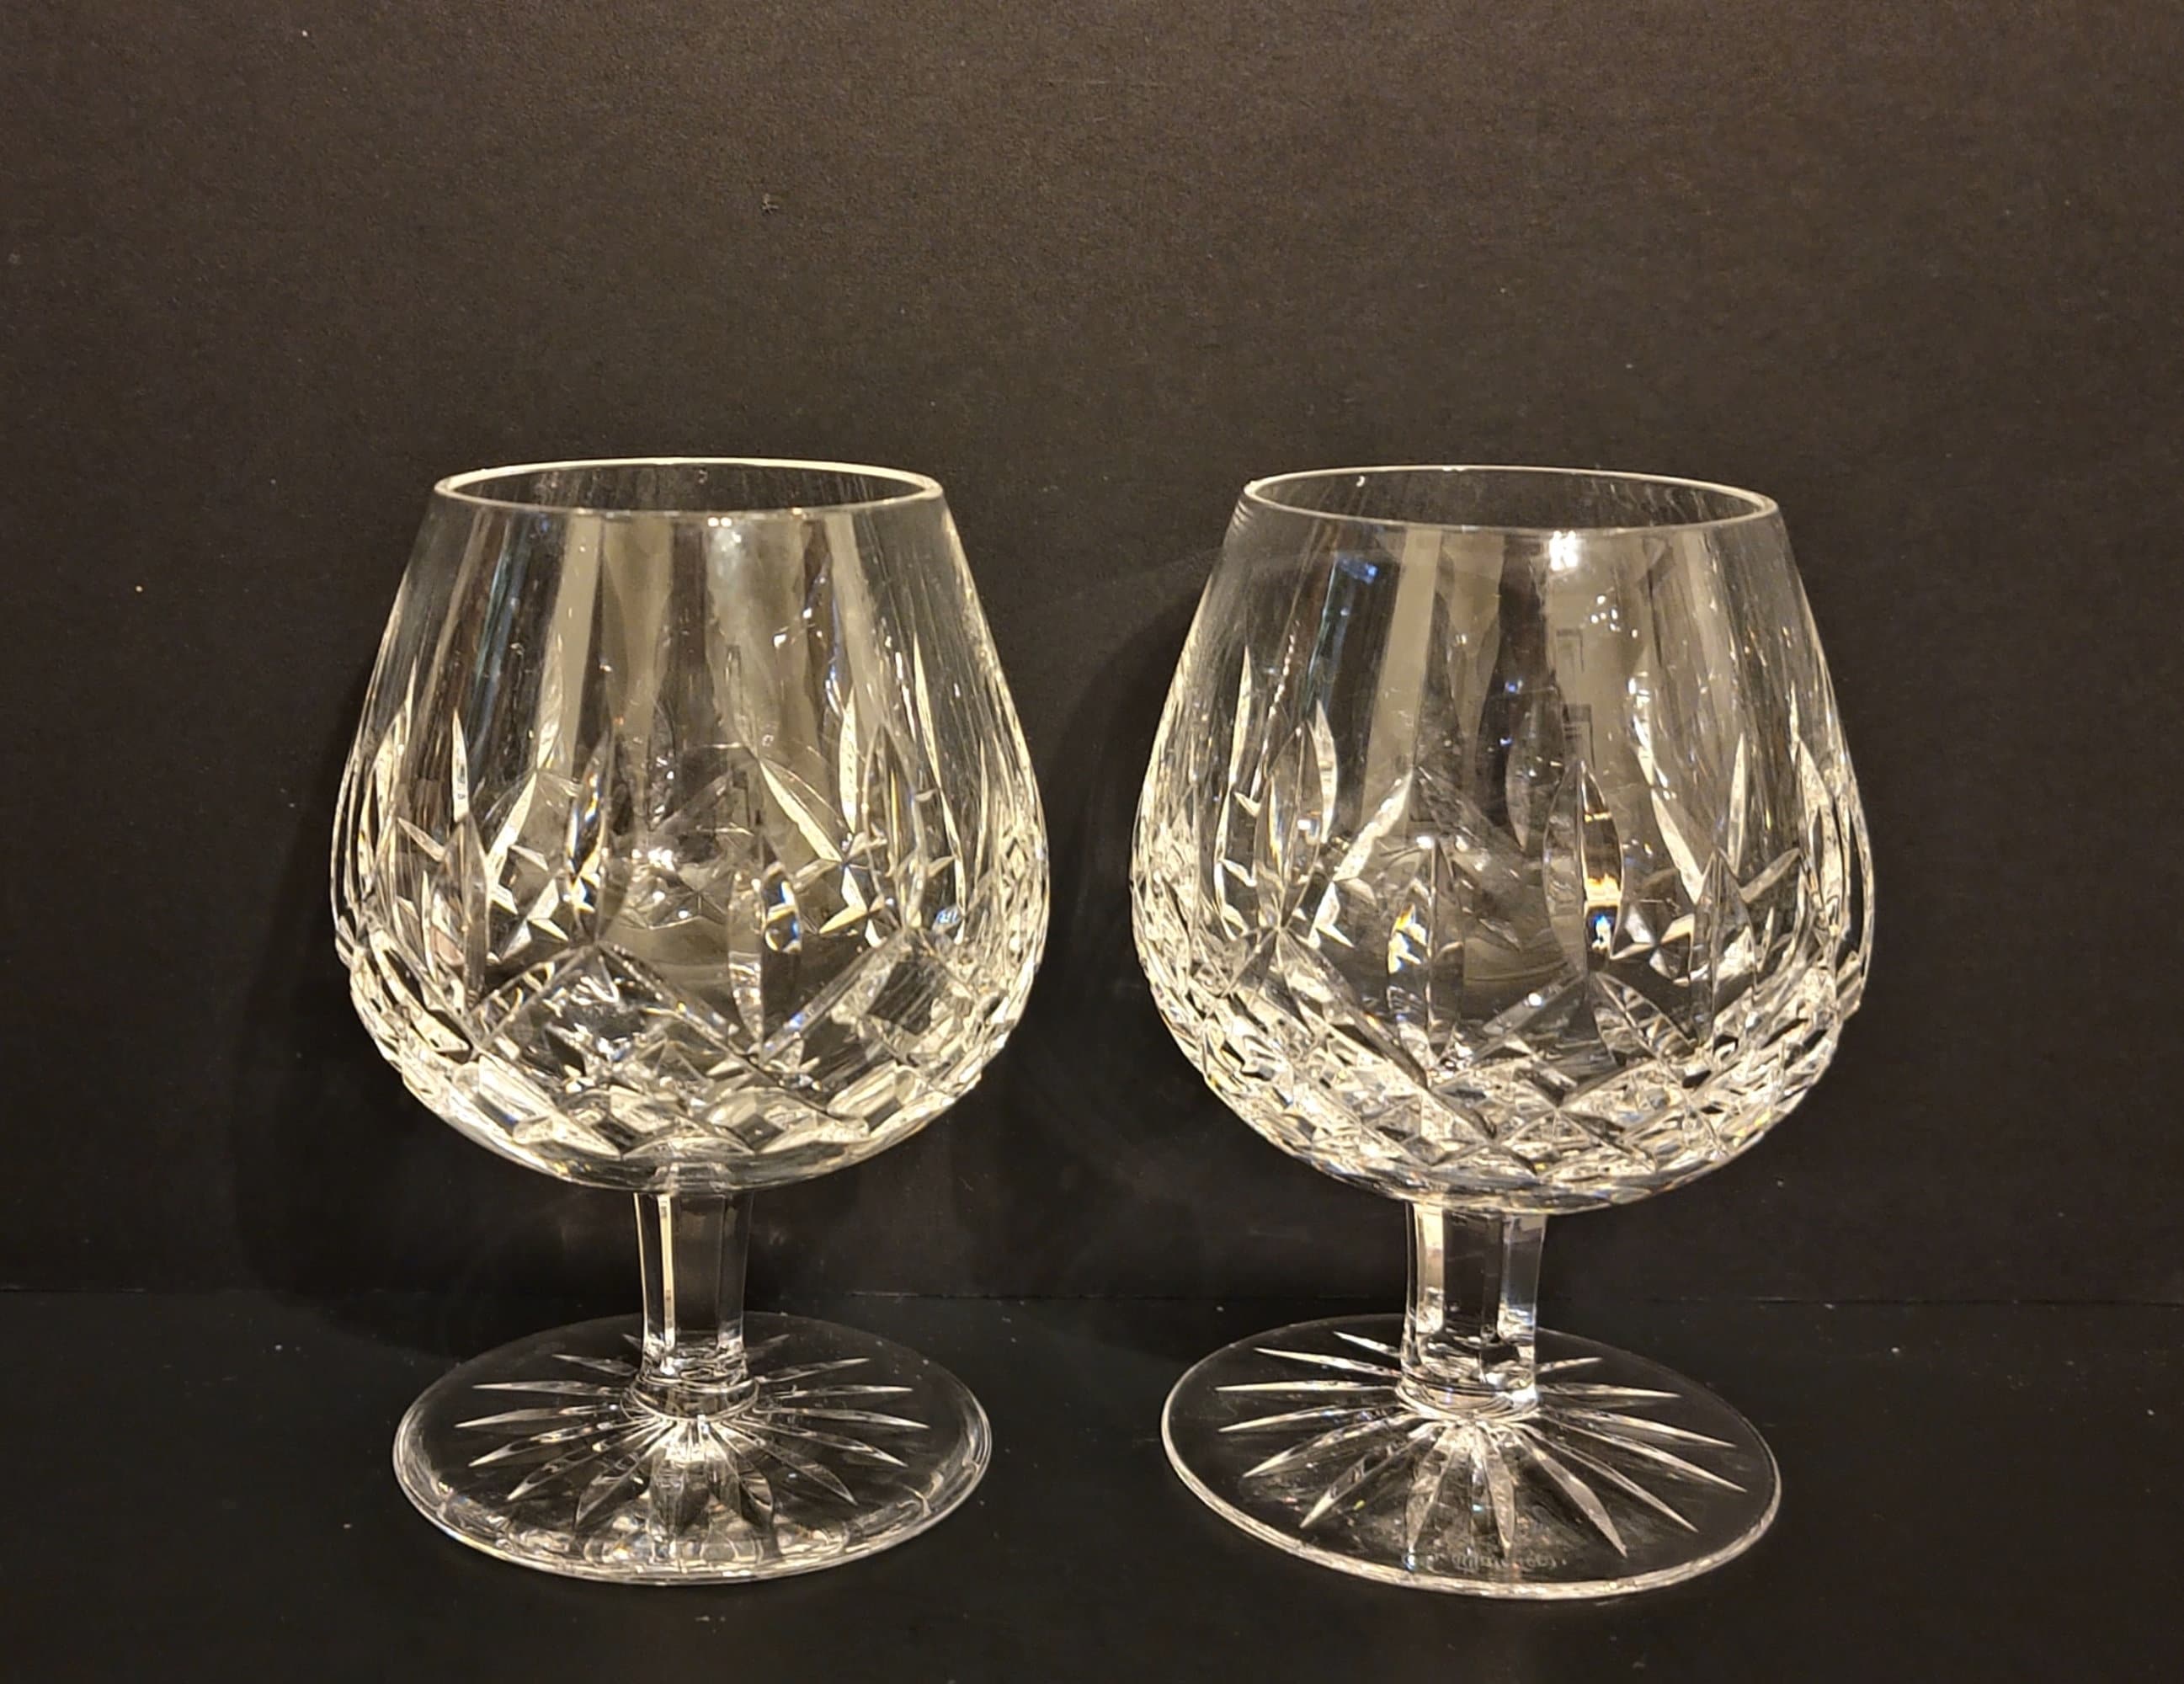 Pair of 5-1/4 Waterford lismore Crystal Brandy Snifters 